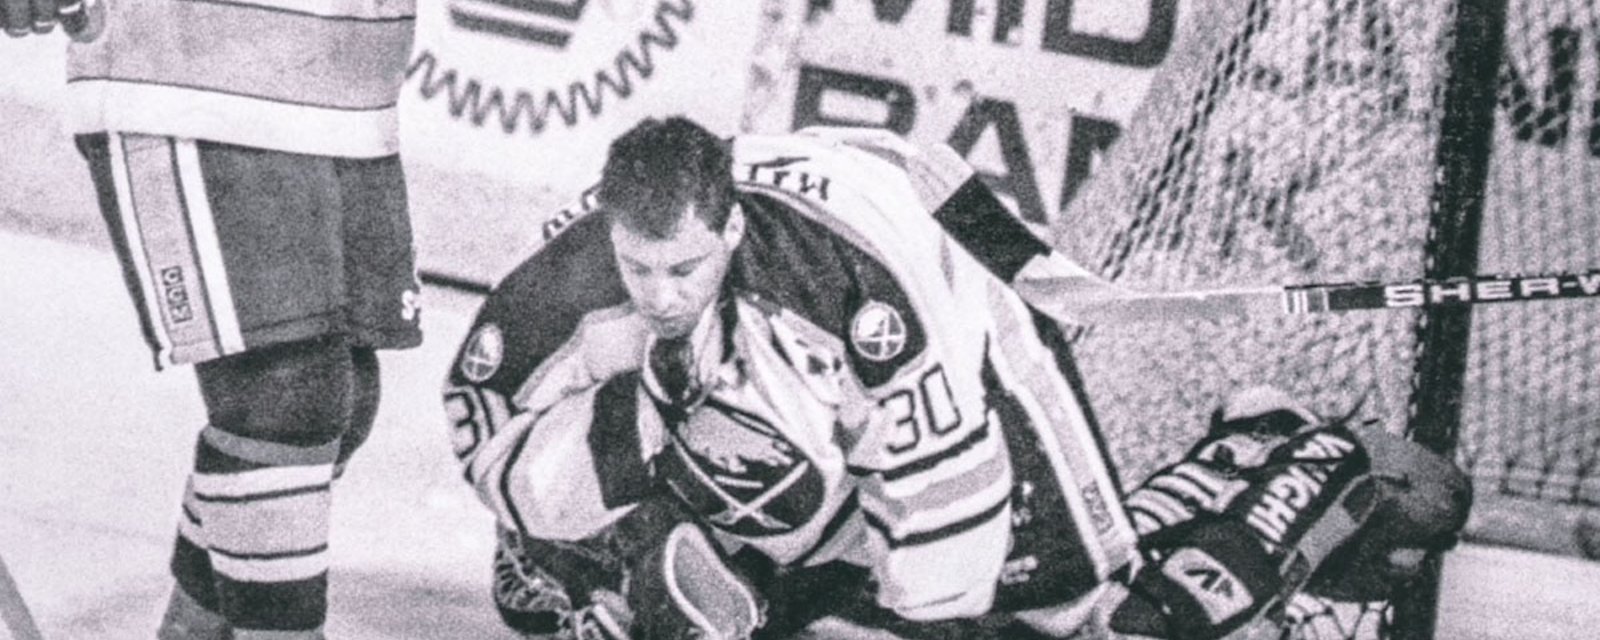 Clint Malarchuk shot himself in the head years after his jugular vein was slashed on the ice